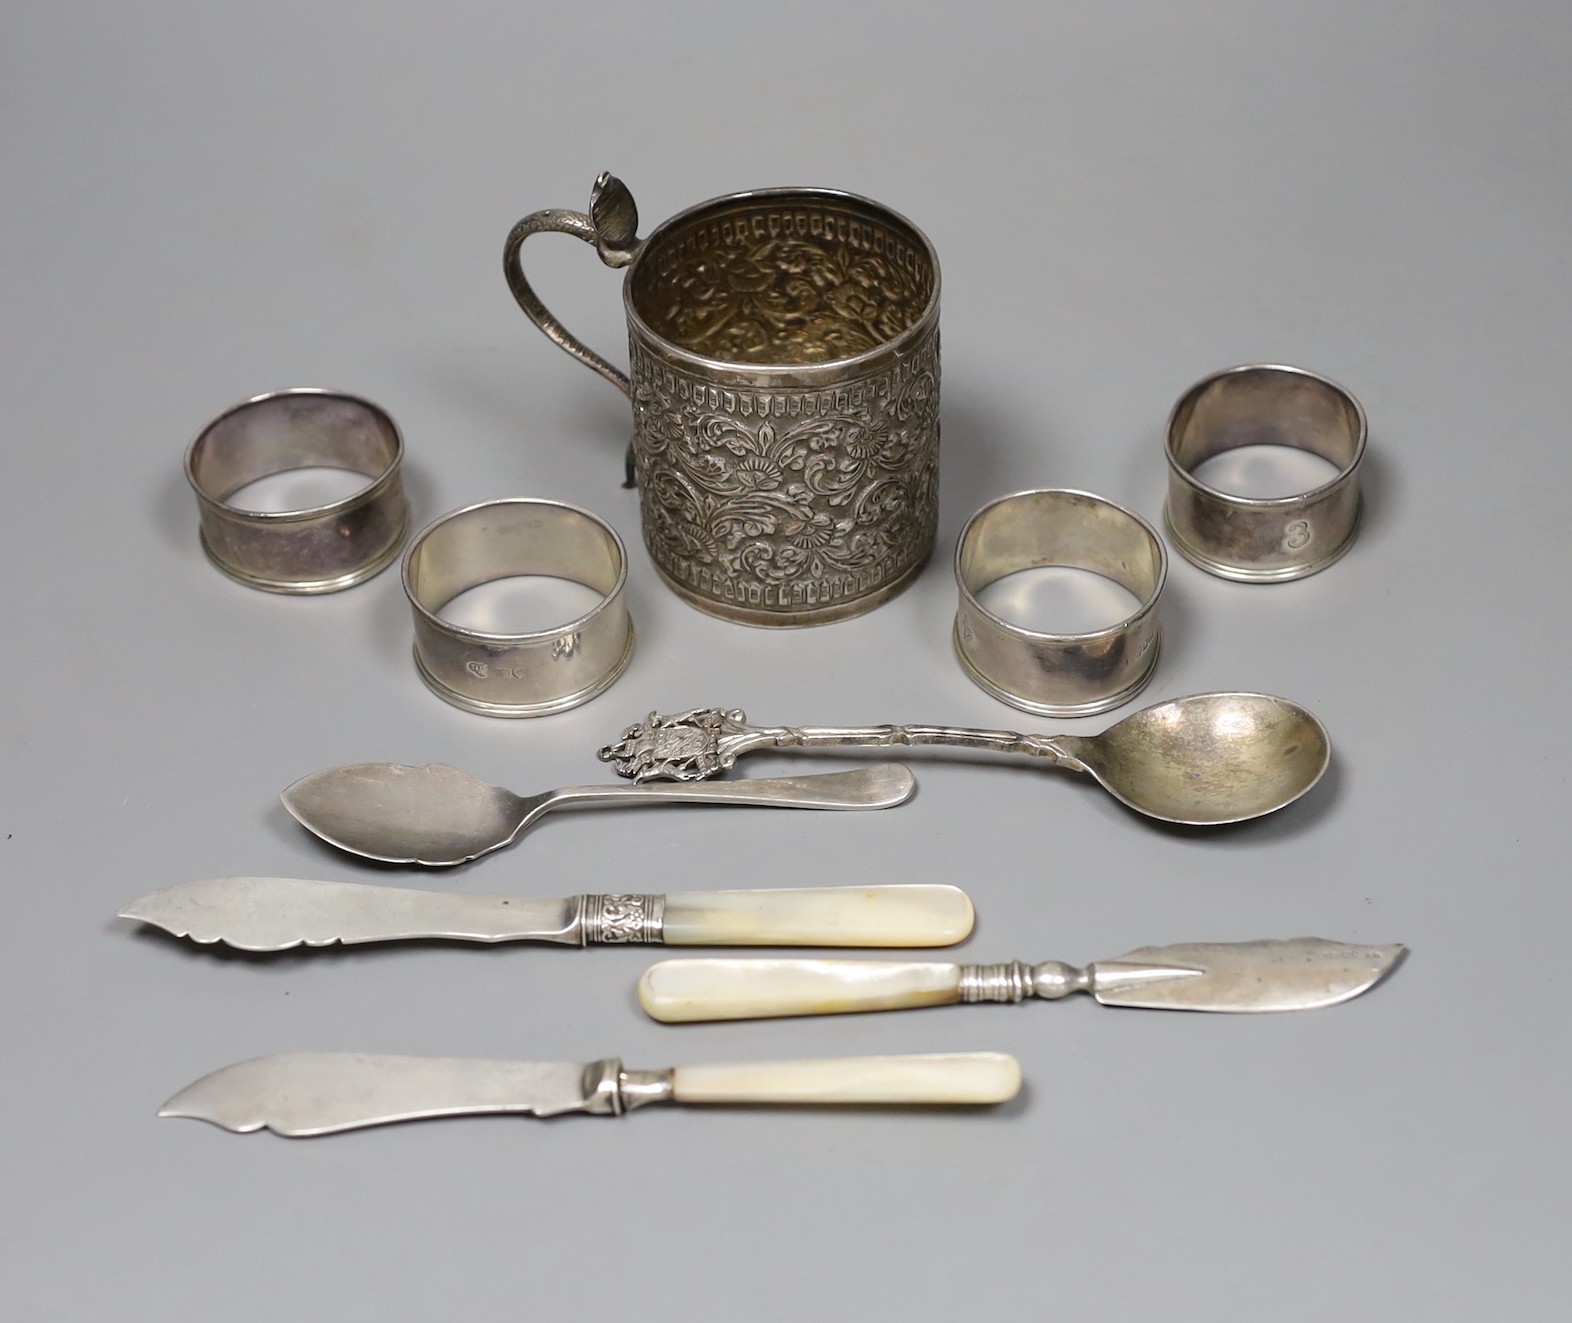 A 19th century Indian white metal christening can with cobra handle, a set of four silver napkin rings, two spoons and three mother of pearl handled butter knives.